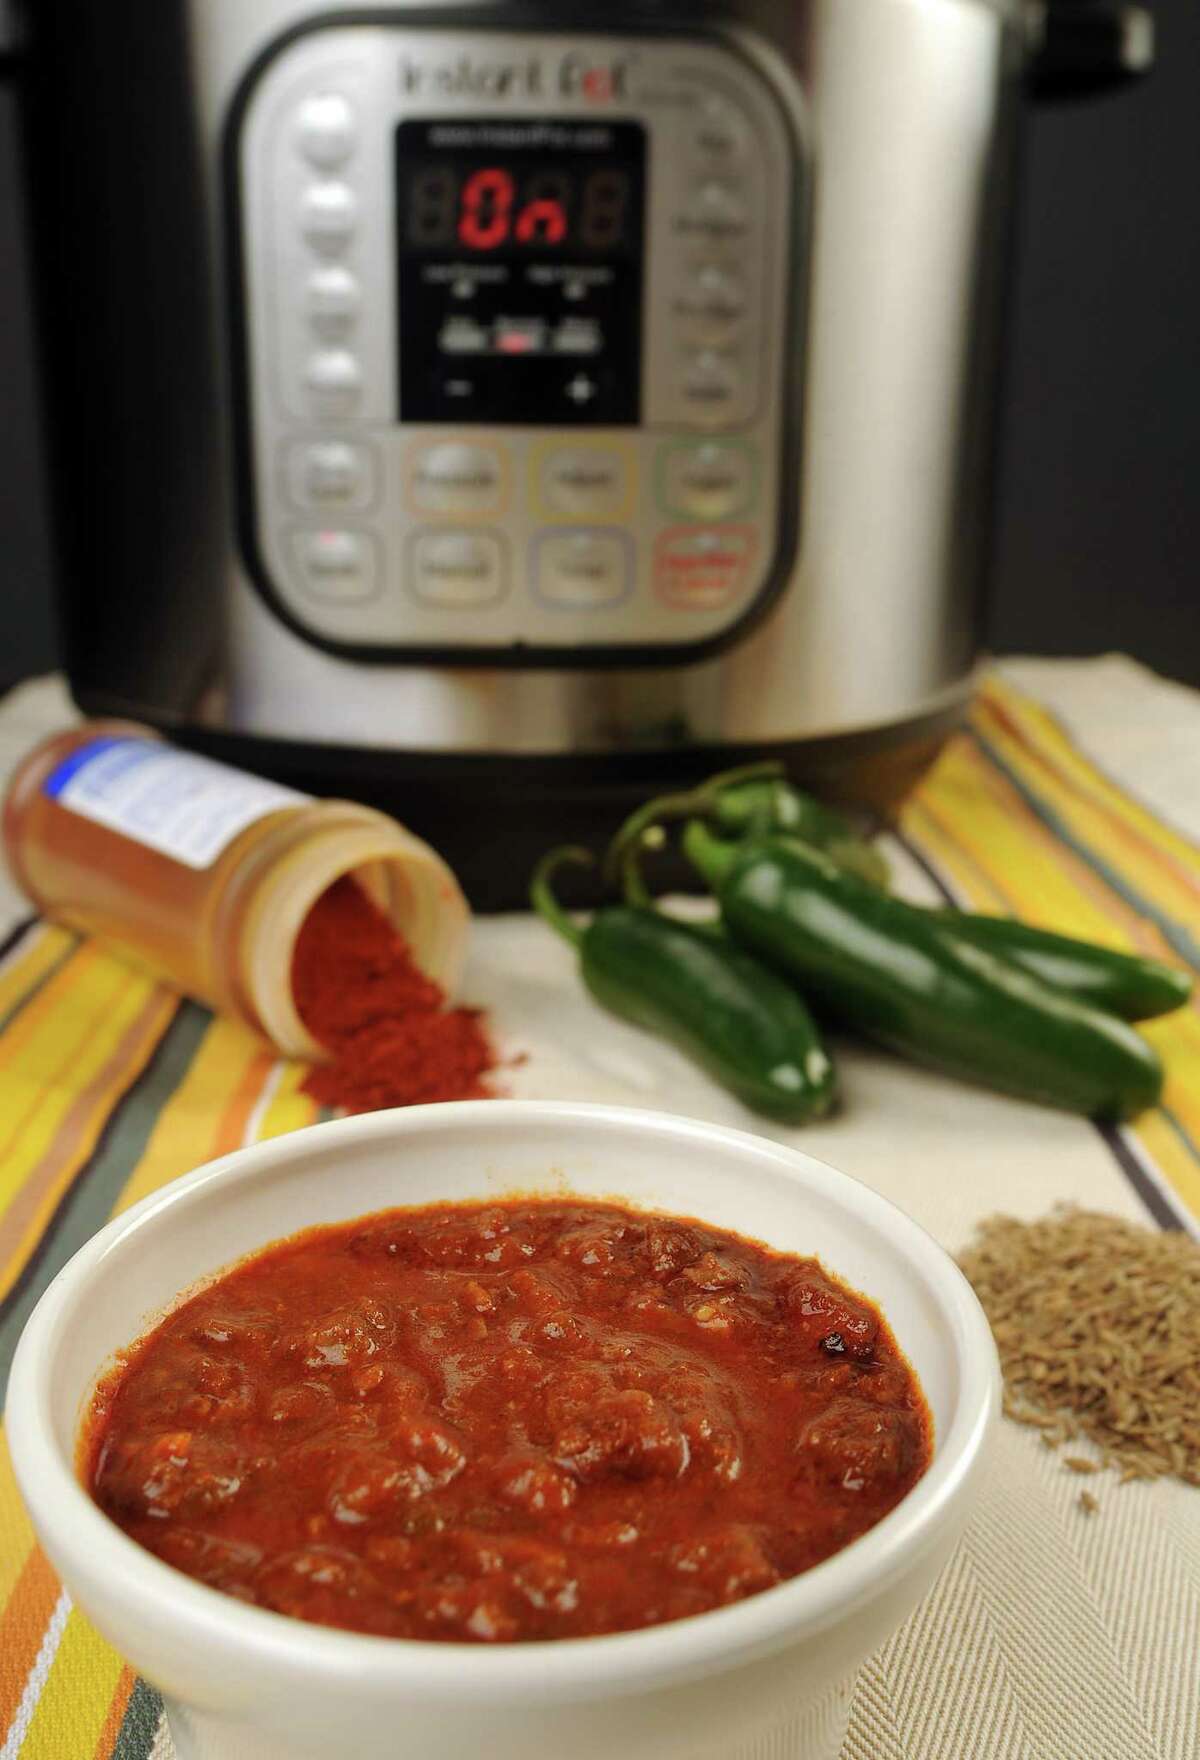 The Instant Pot programmable pressure cooker dramatically cuts down the time required to make long-simmered Texas favorites such as chili.